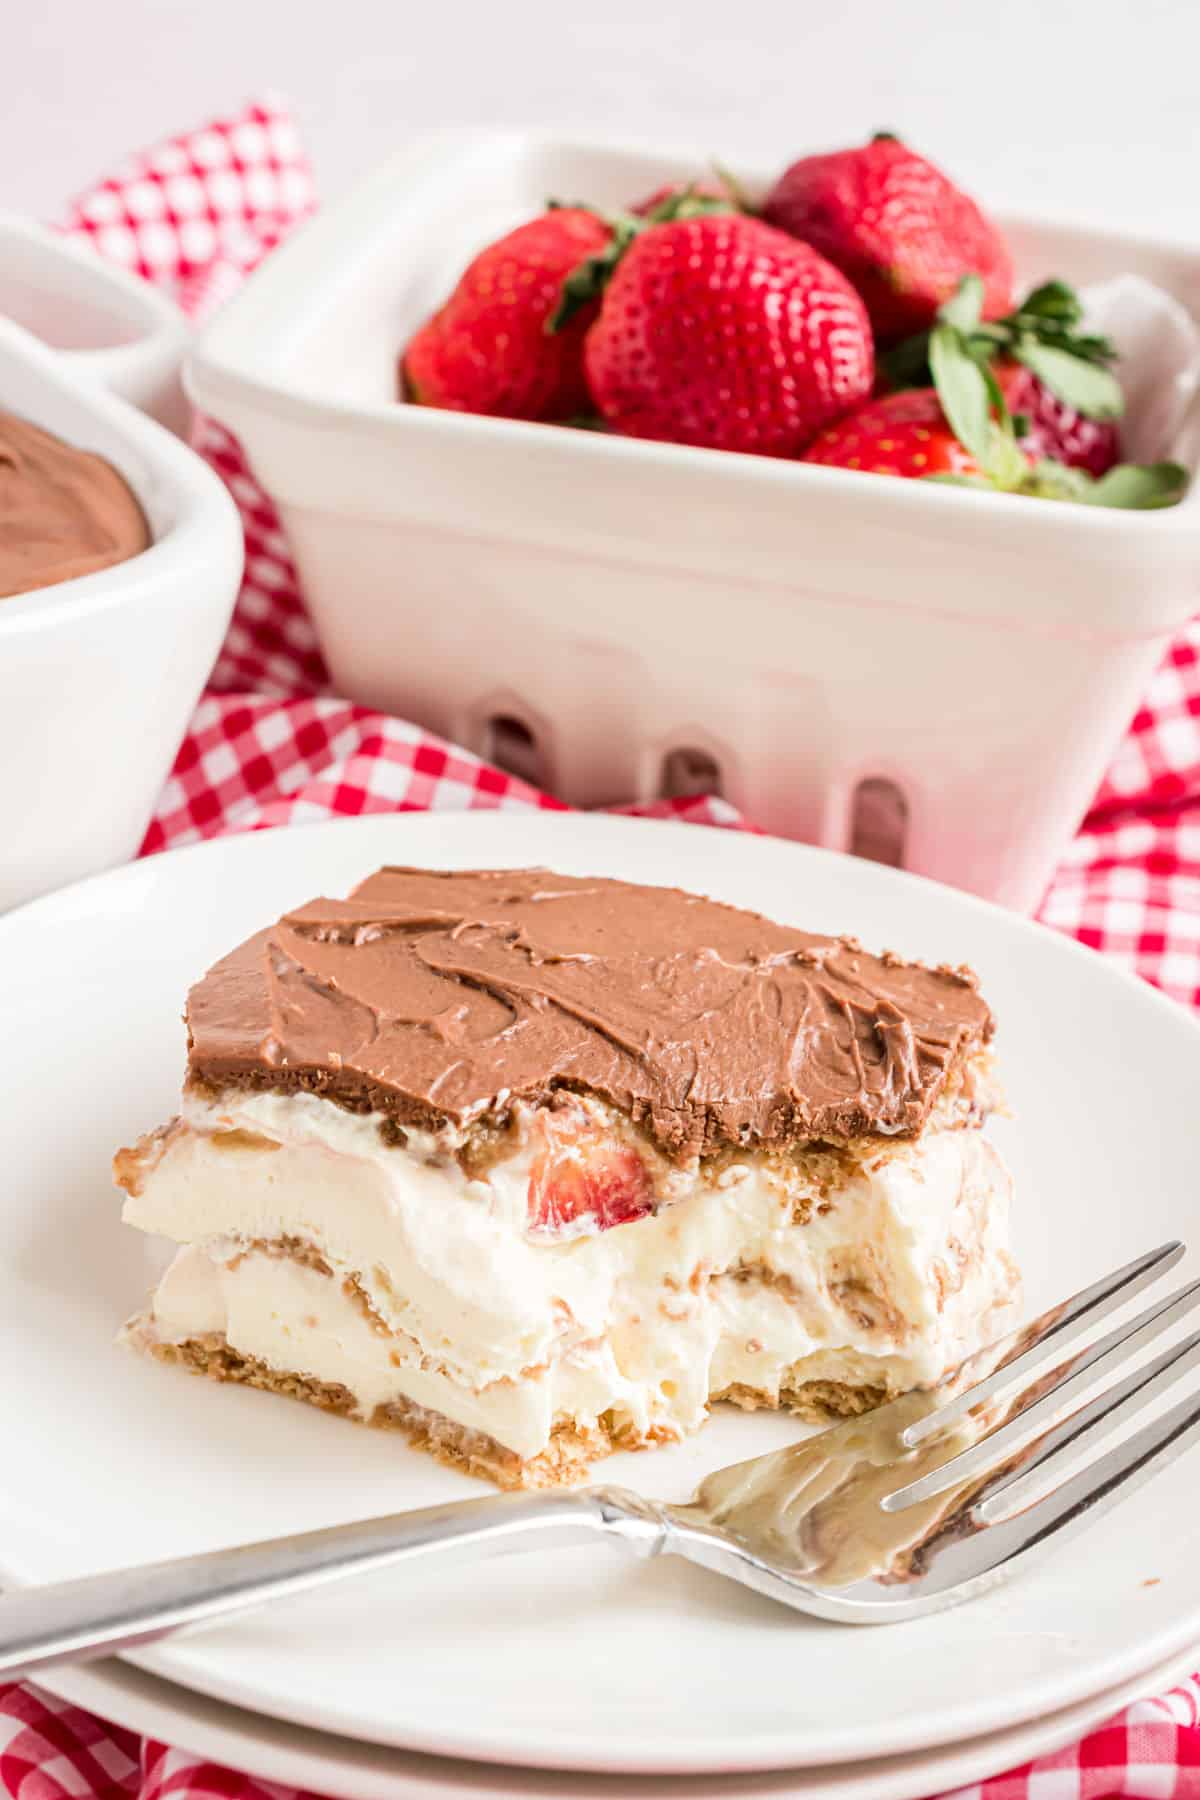 Slice of strawberry eclair cake on white plate with a bite taken.